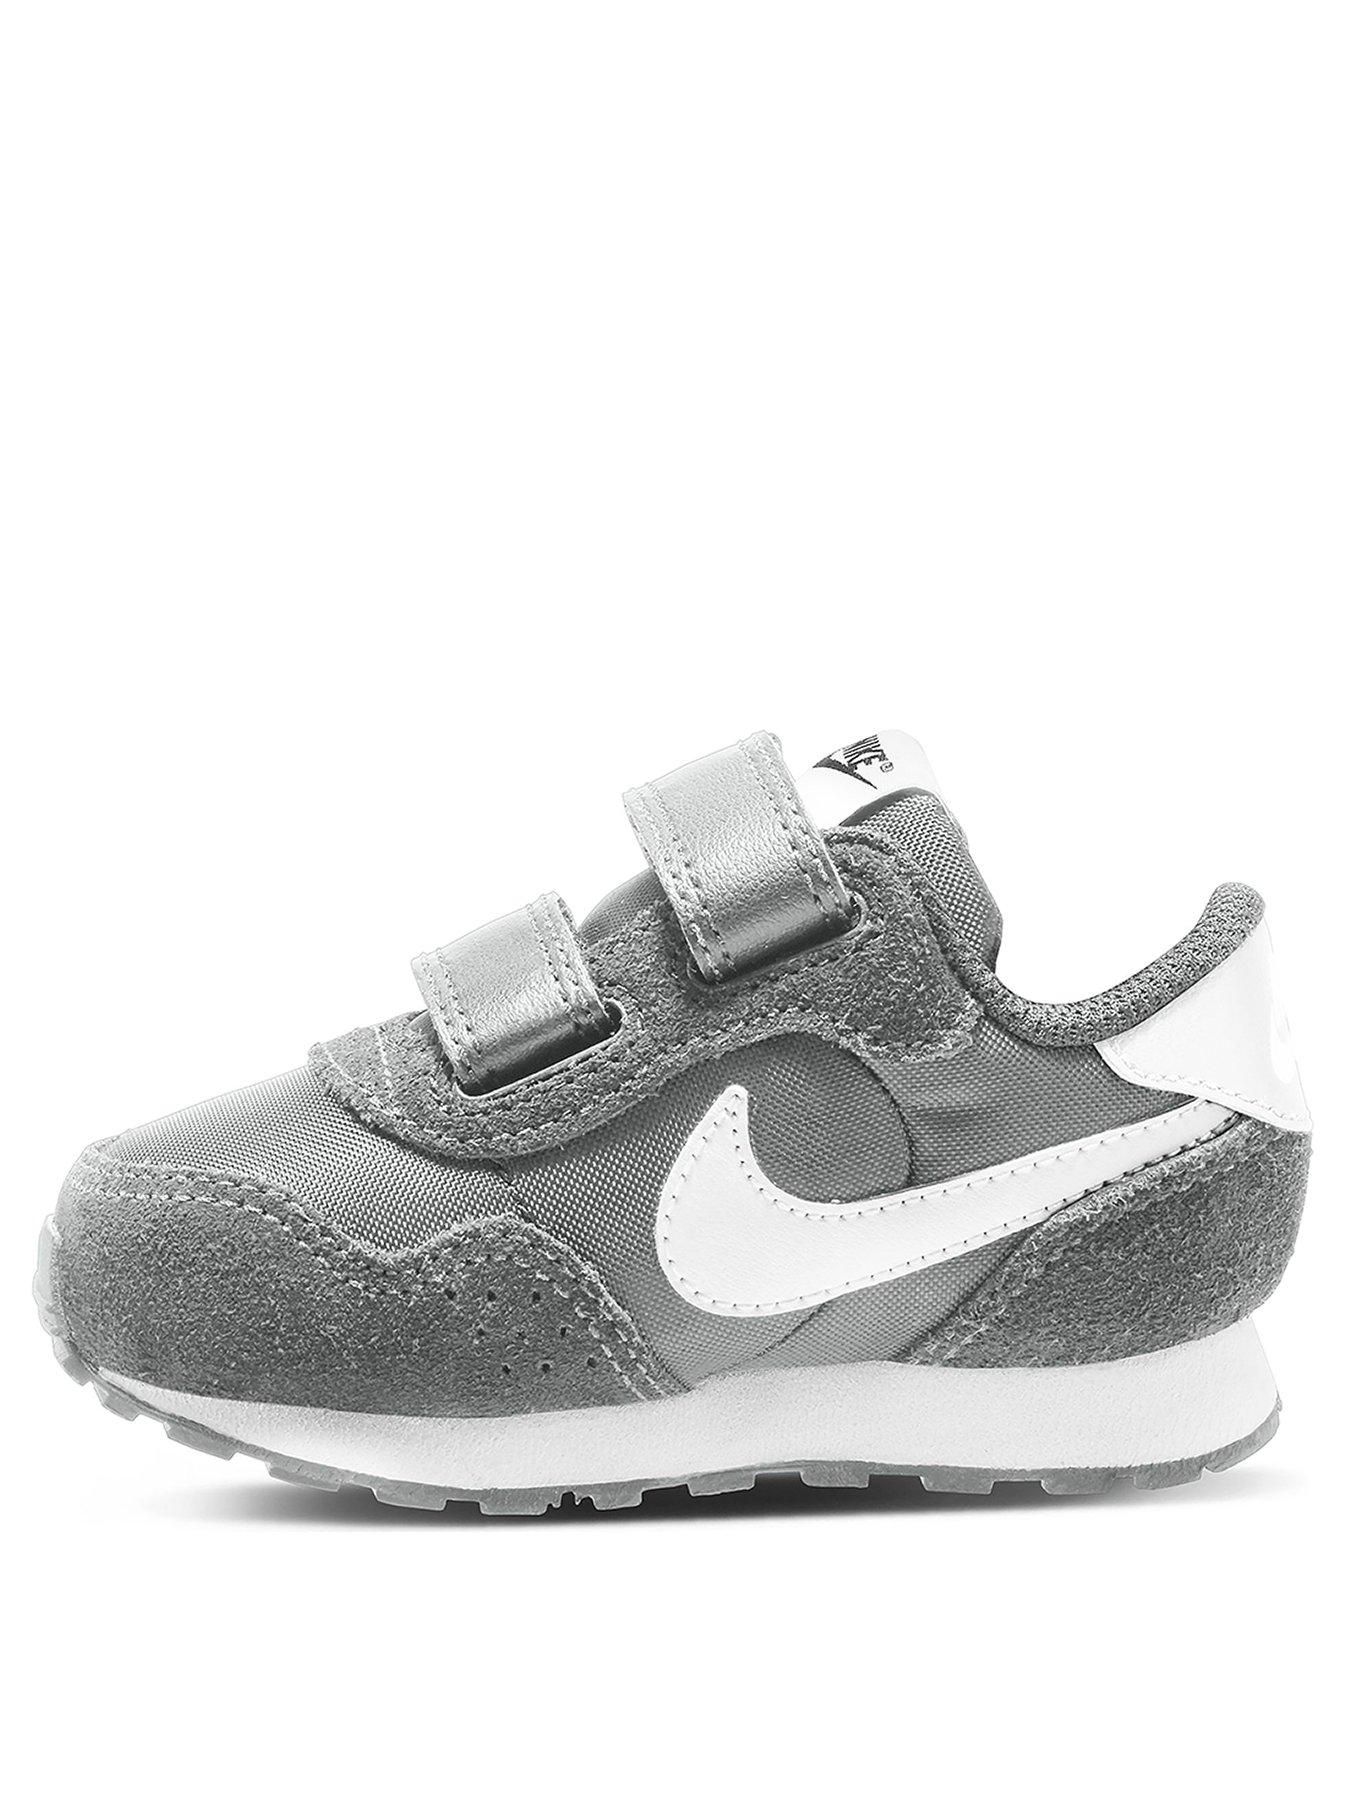 infant size 4 nike trainers